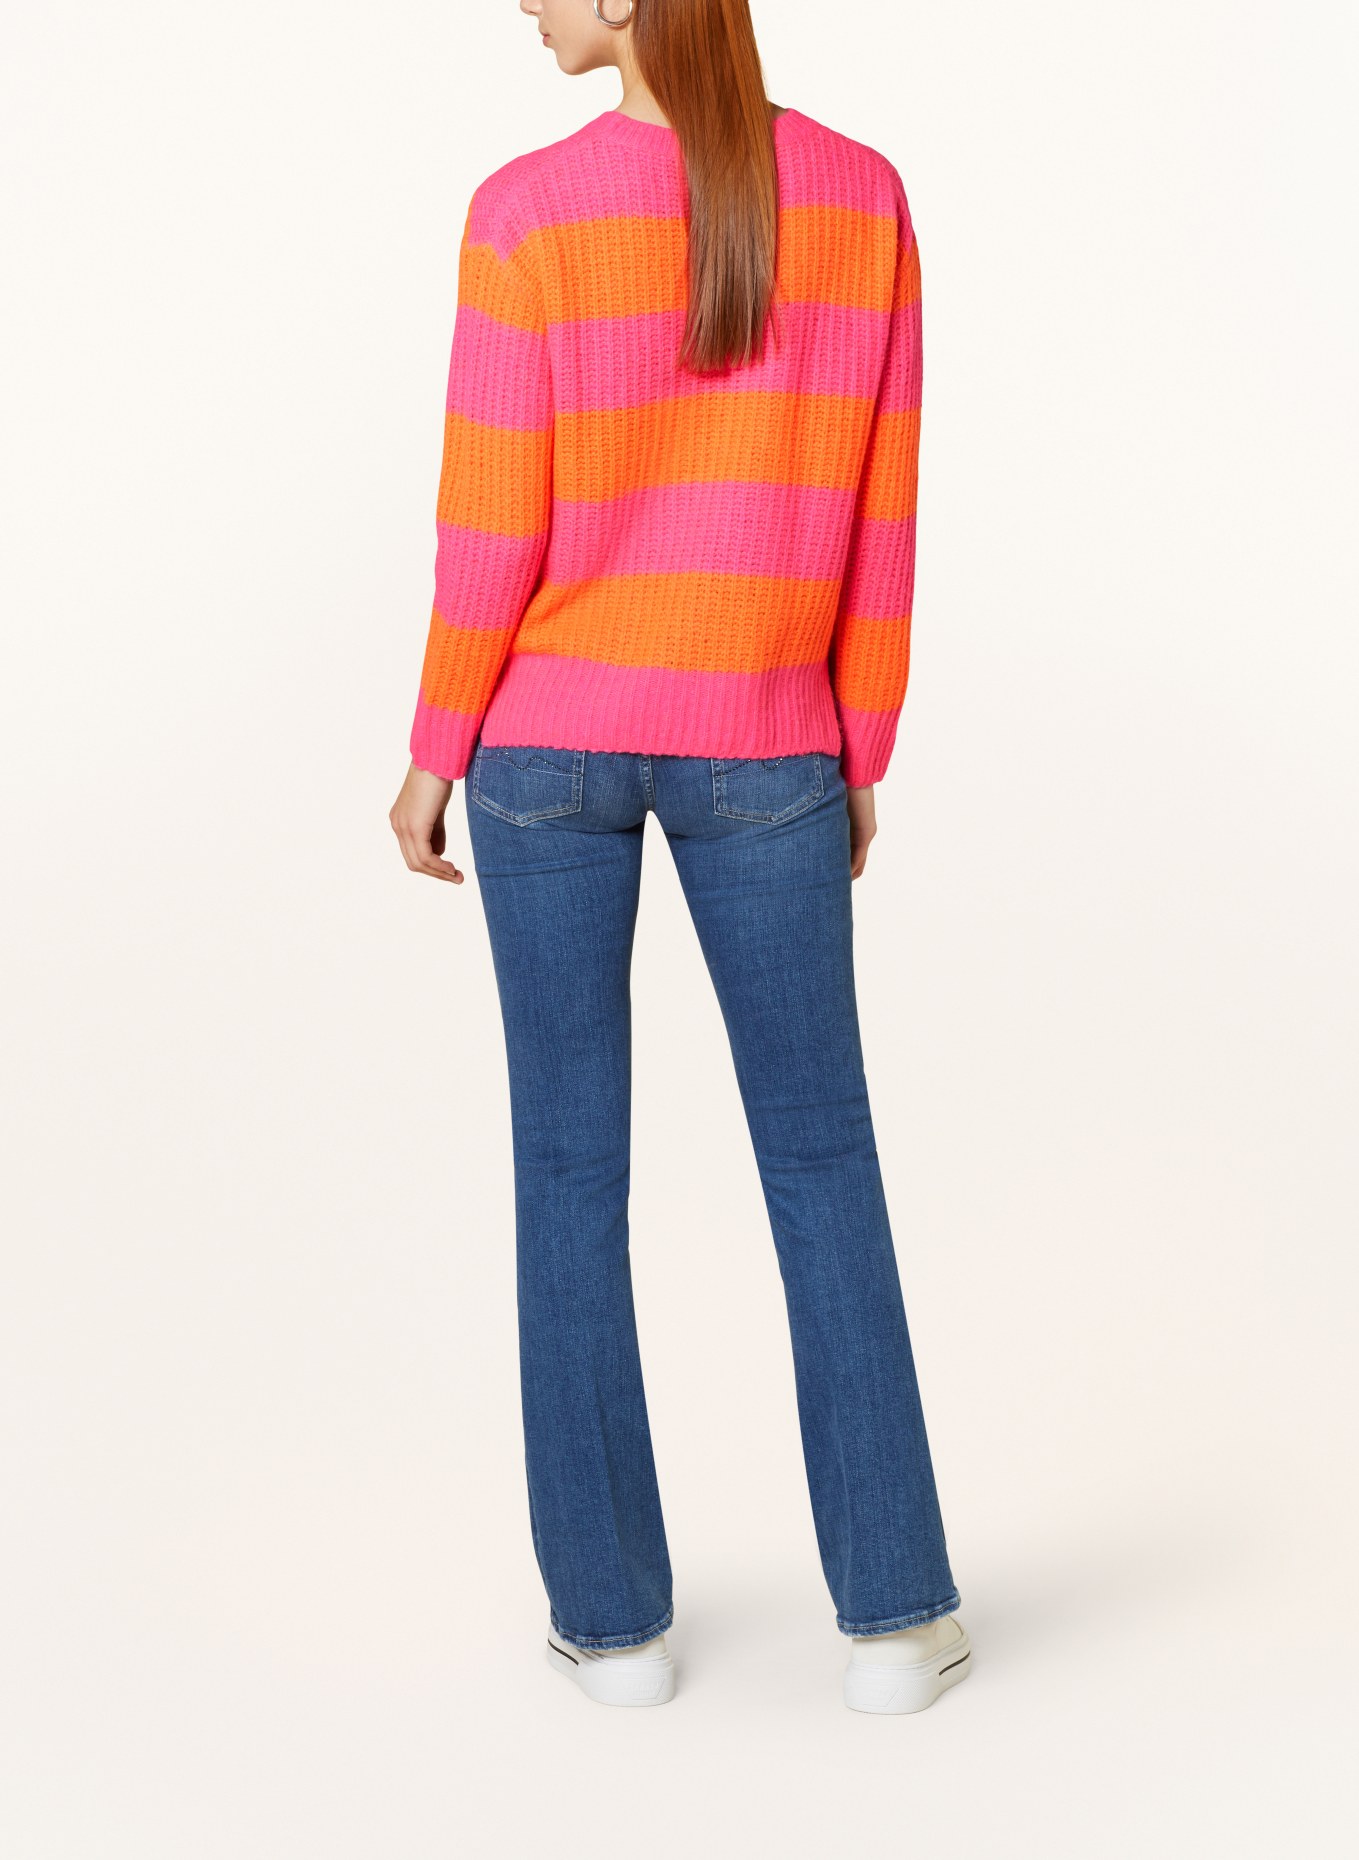 Princess GOES HOLLYWOOD Sweater with glitter thread, Color: PINK/ ORANGE (Image 3)